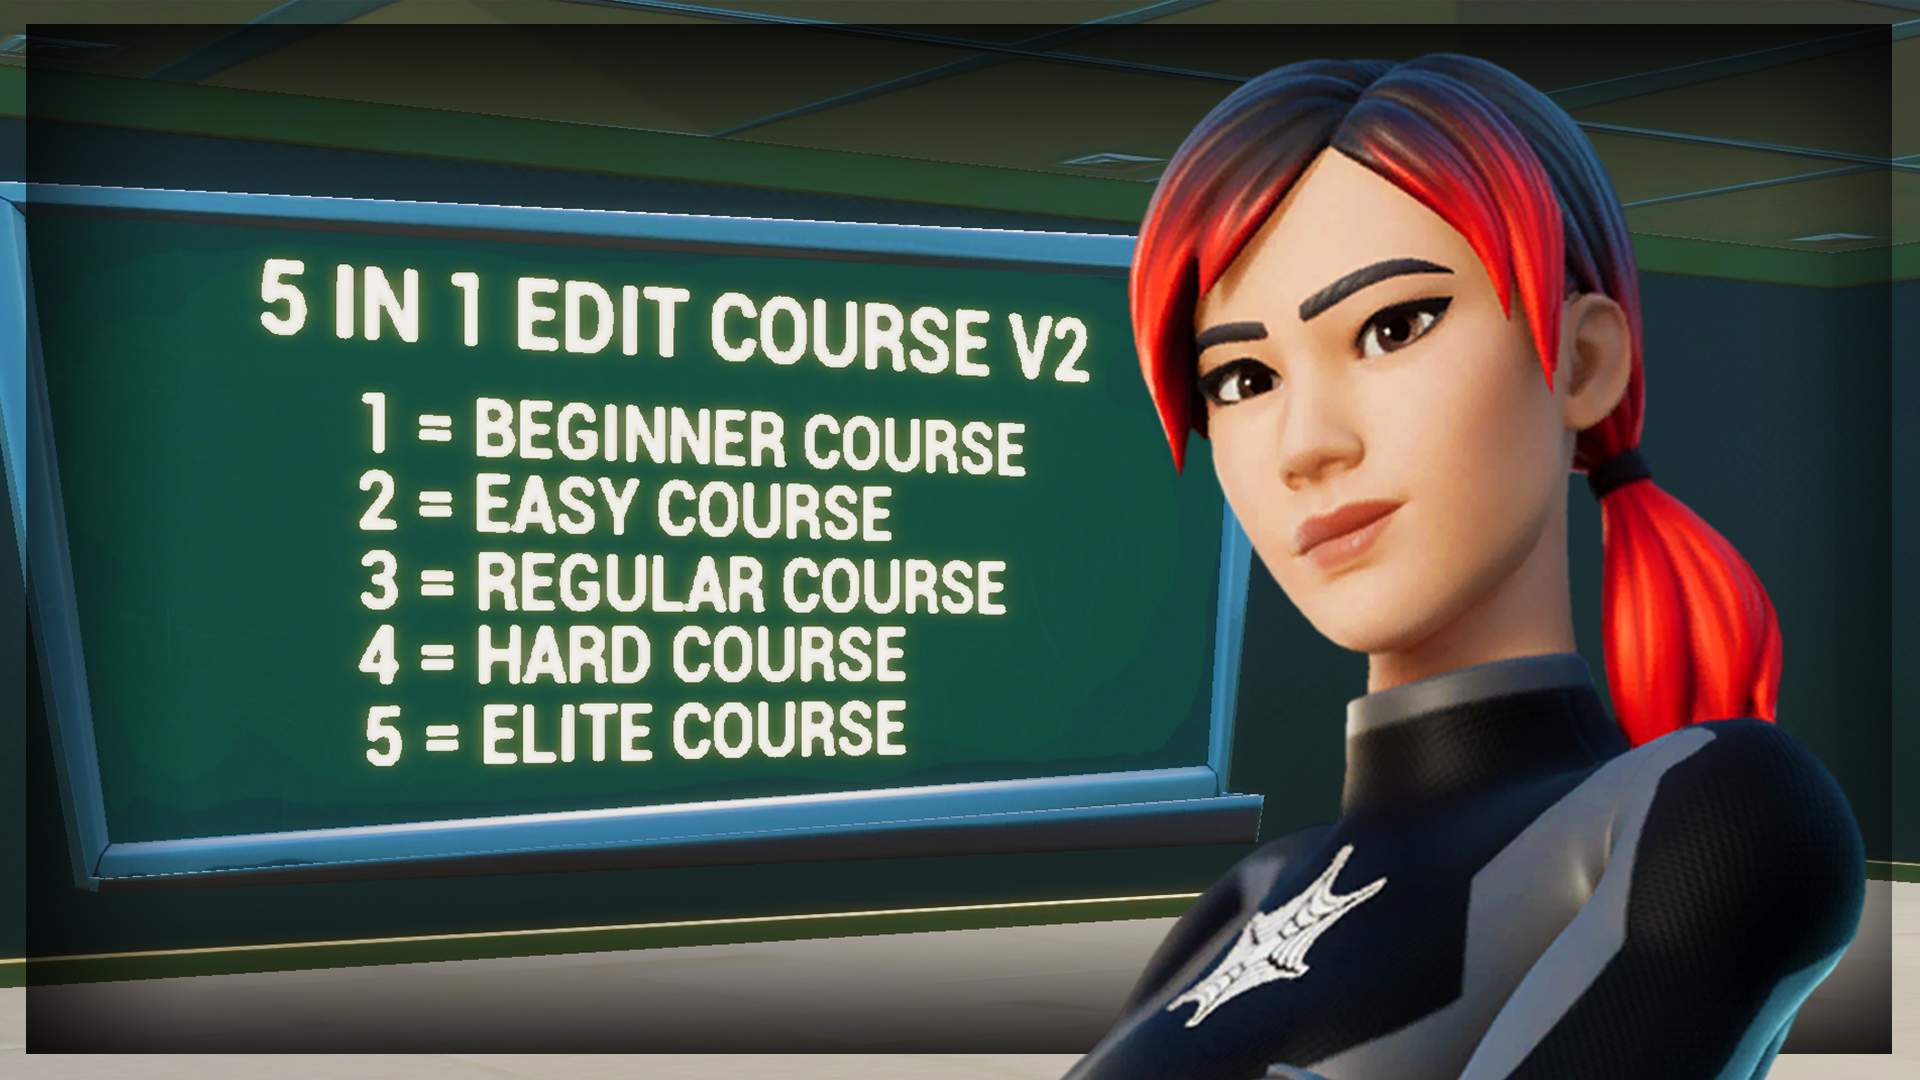 5 IN 1 EDIT COURSE V2